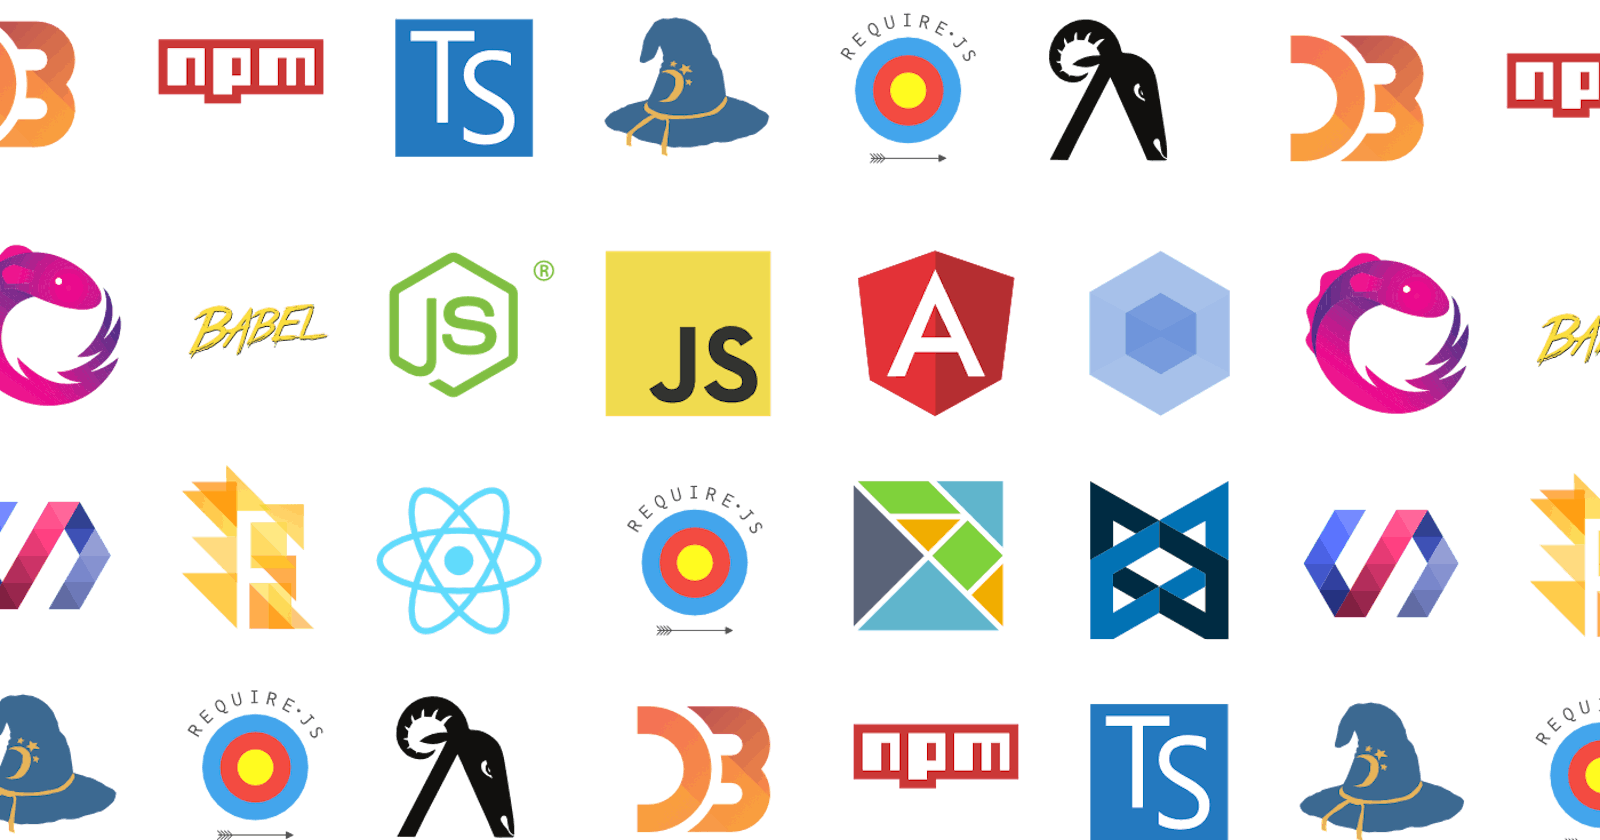 Did you know that nearly every JavaScript tool you use is open sourced?